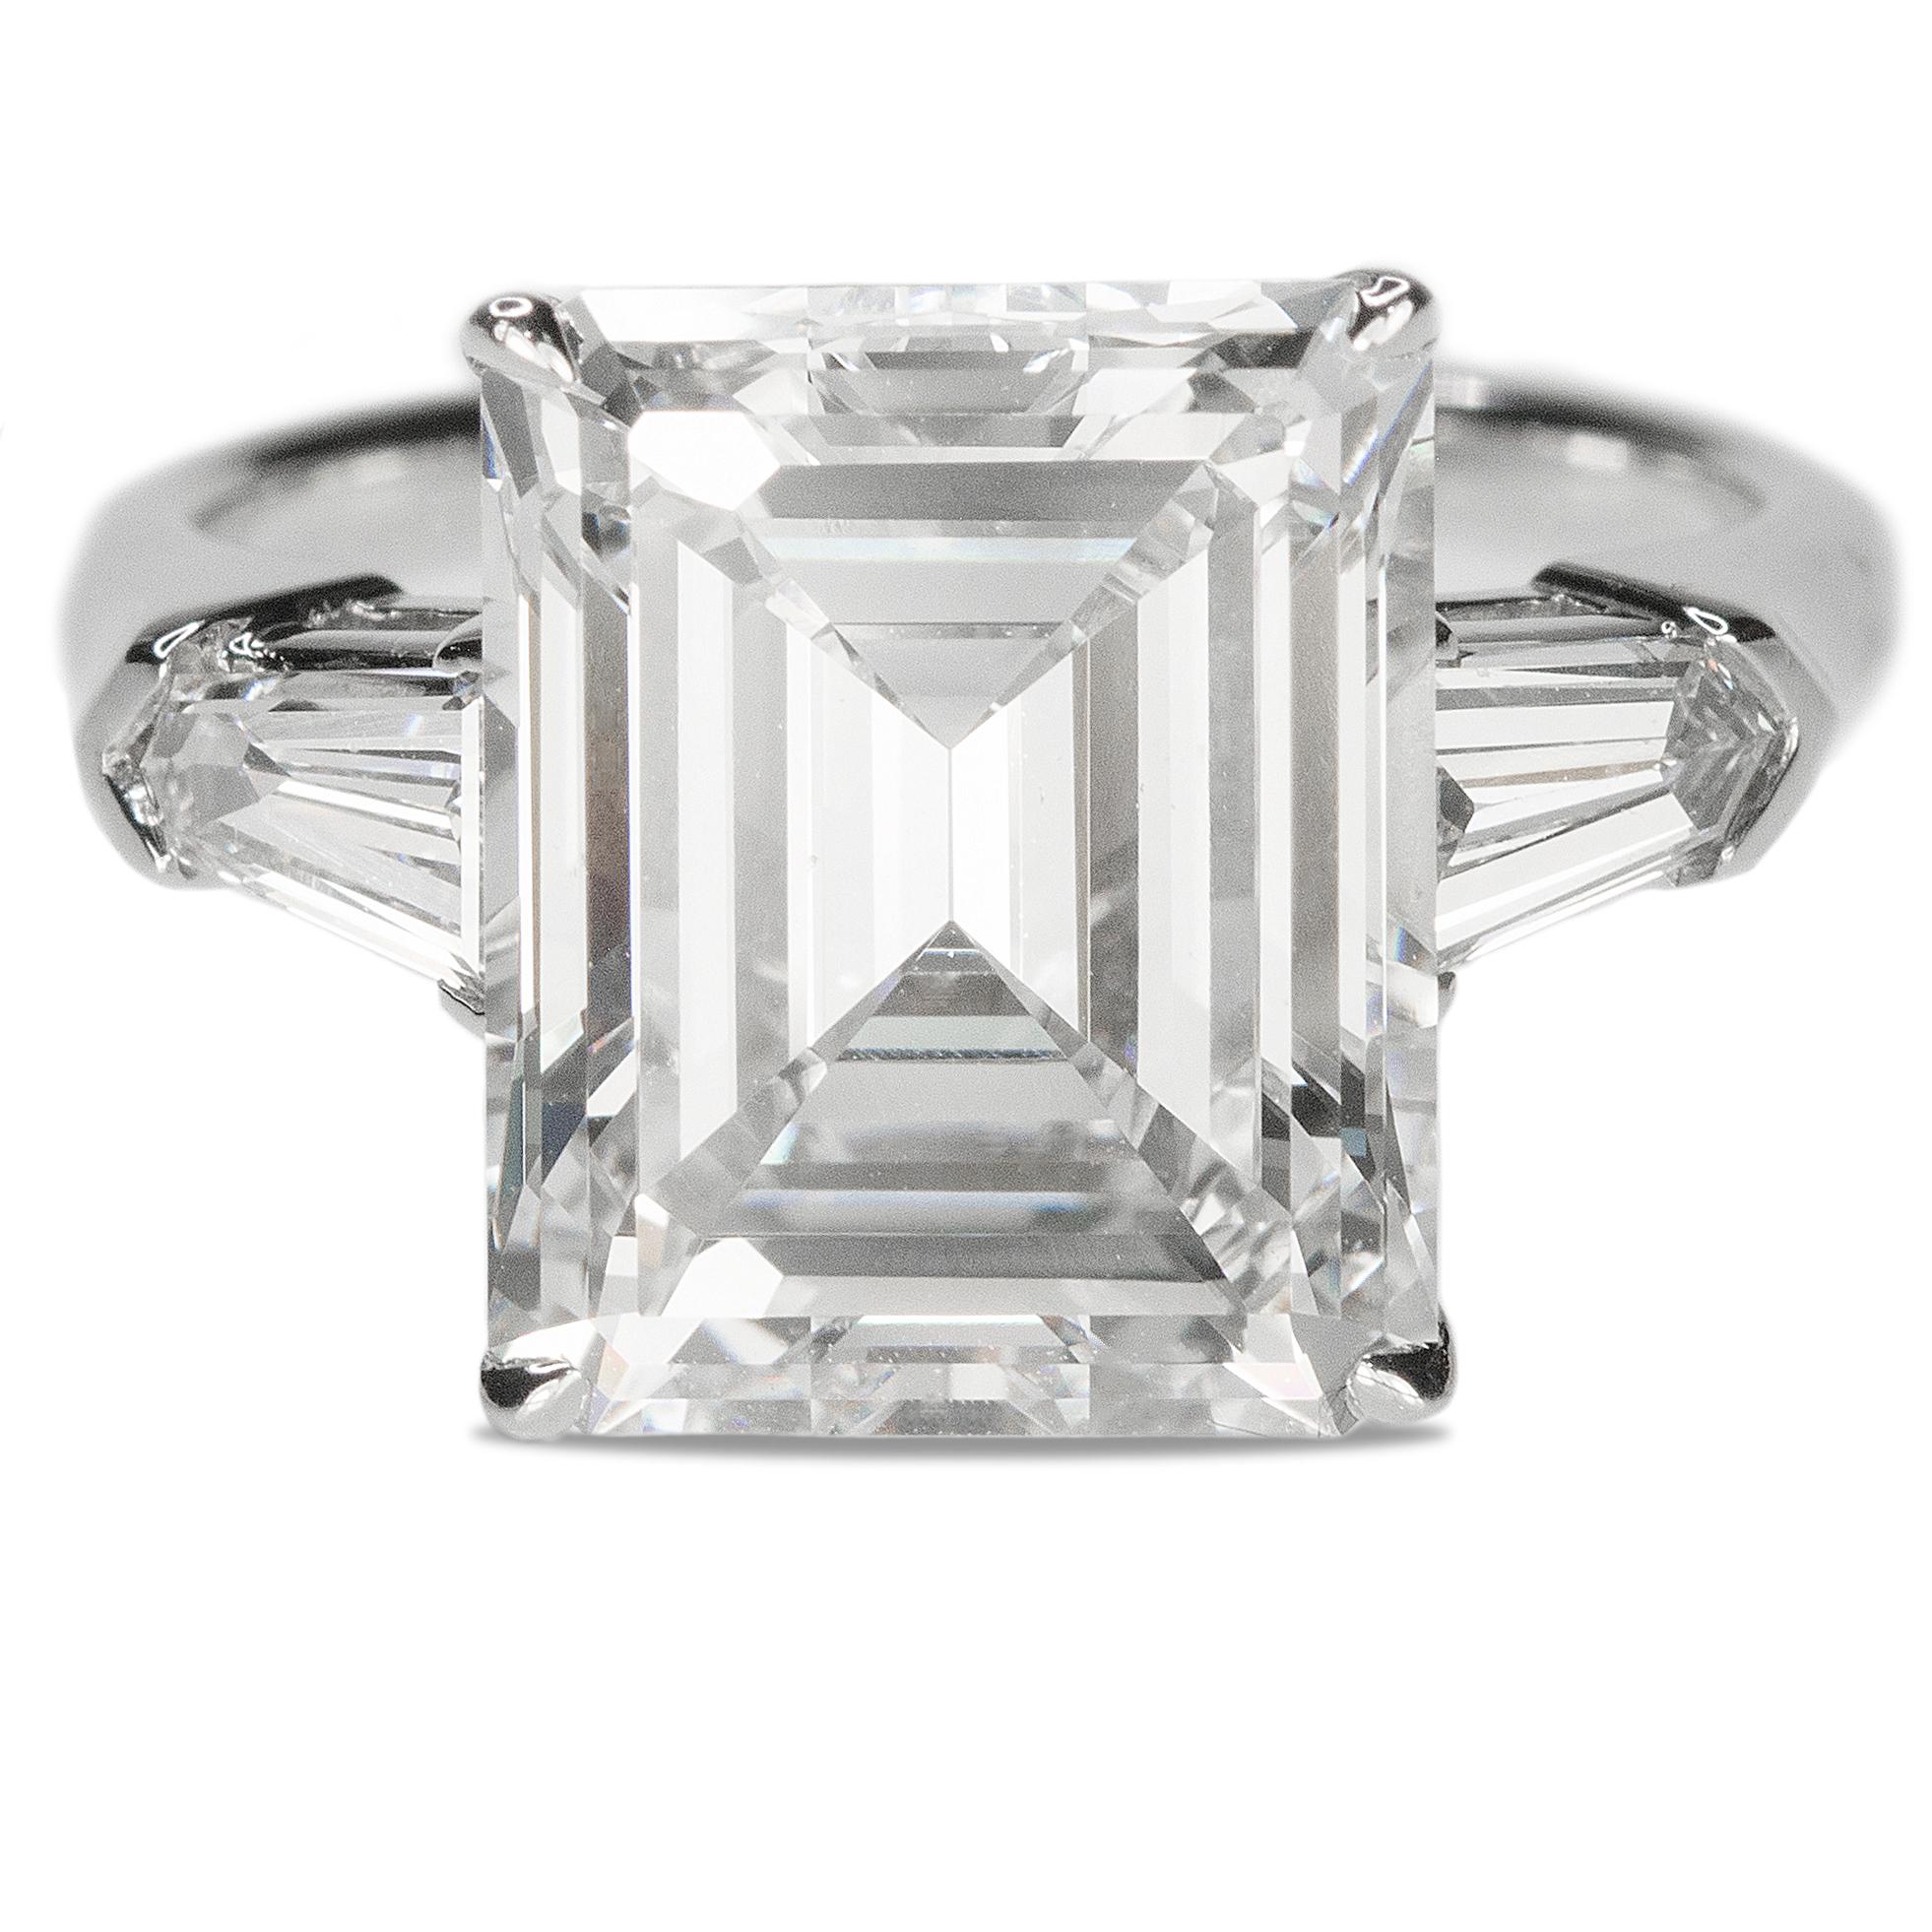 Absolutely the most beautifully emerald cut diamond ring on the market. This perfectly cut 5.01 carat emerald cut is graded by GIA as an H color VS2 clarity and is 100% eye clean. Set in a platinum mounting with two bullet shape side stones weighing